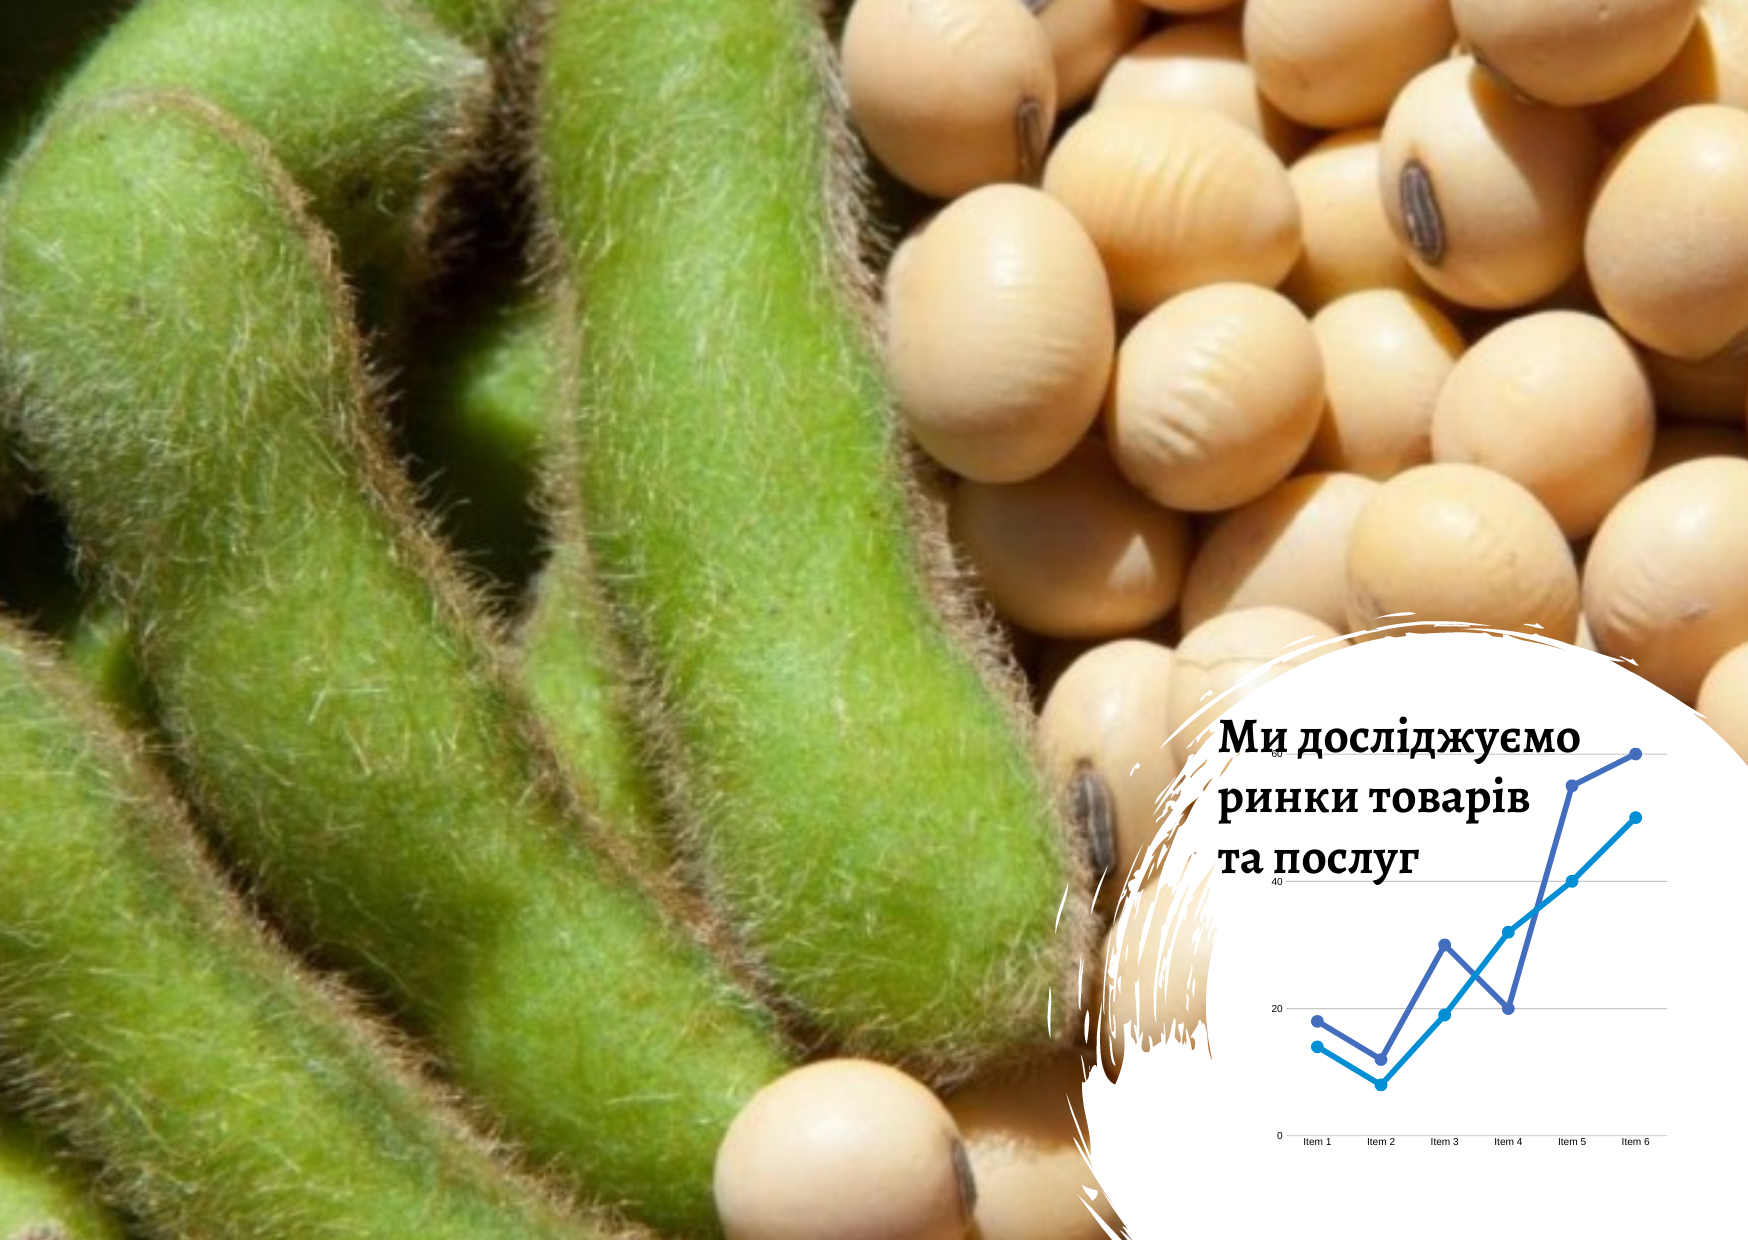 Ukrainian soybean and processed products market – research